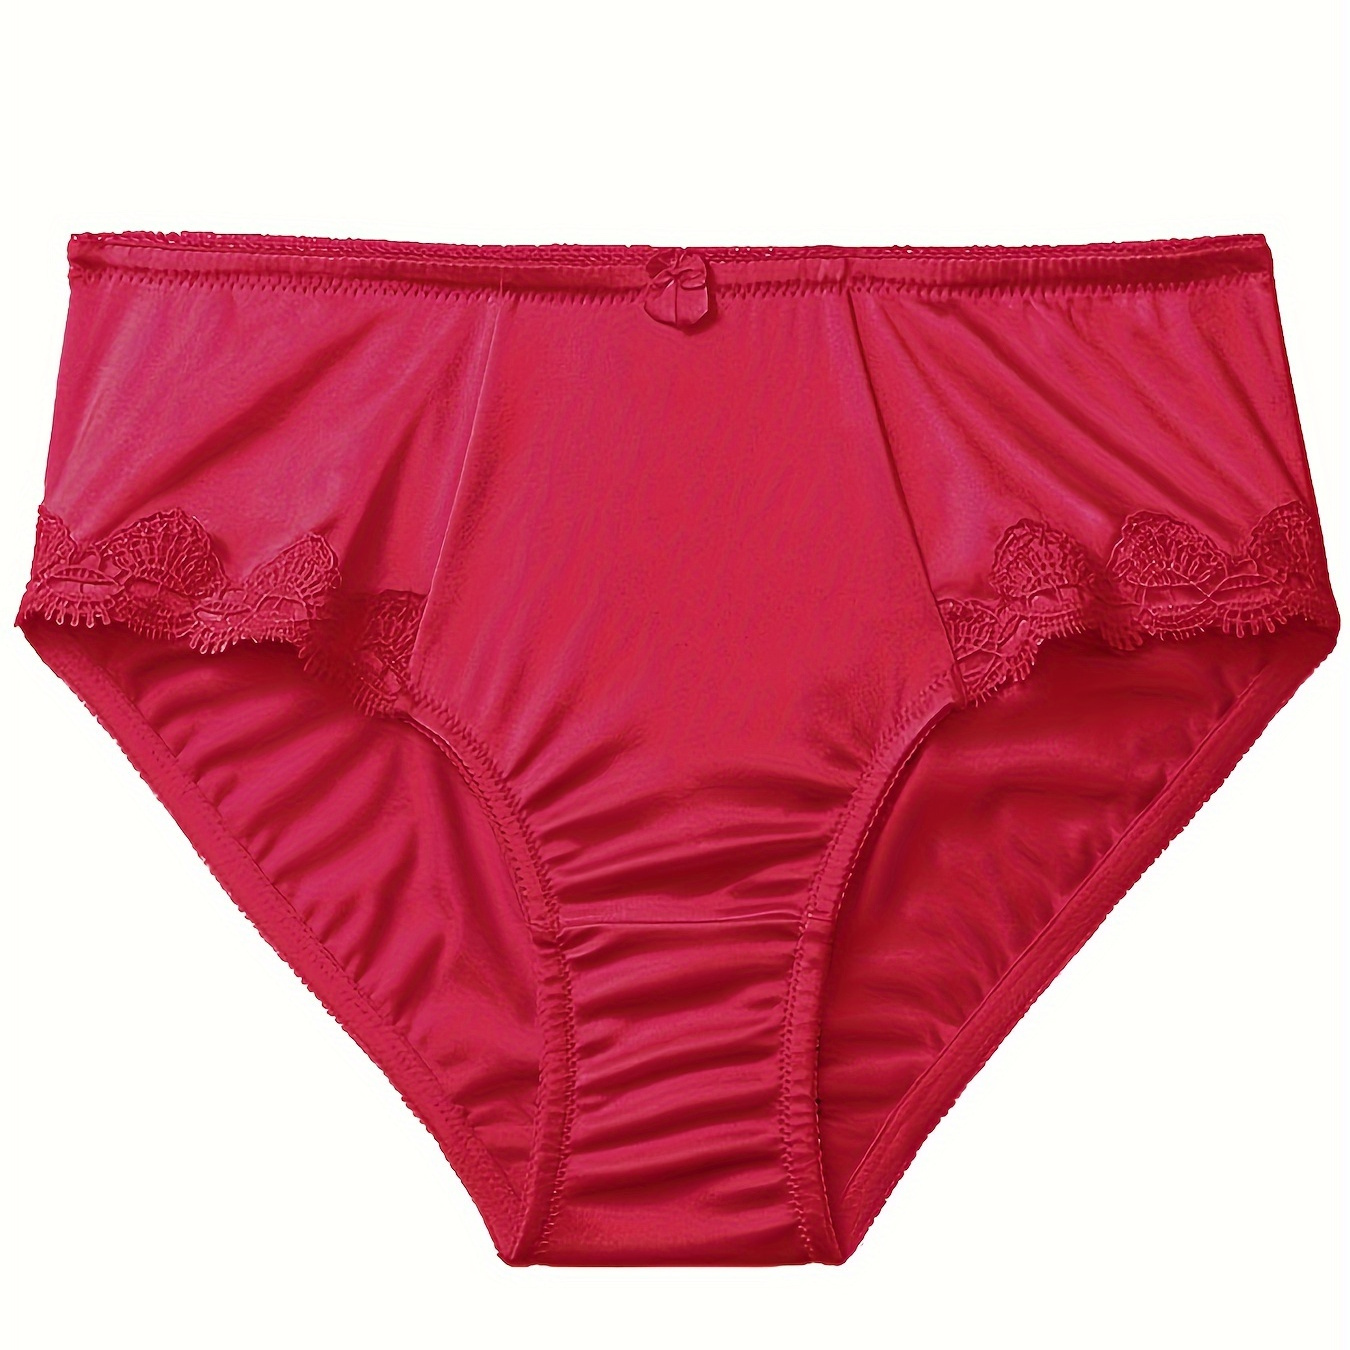 

Women's Valentine's Day Sexy Panty, Plus Size Contrast Lace Mini Bow Decor High Waist Brief